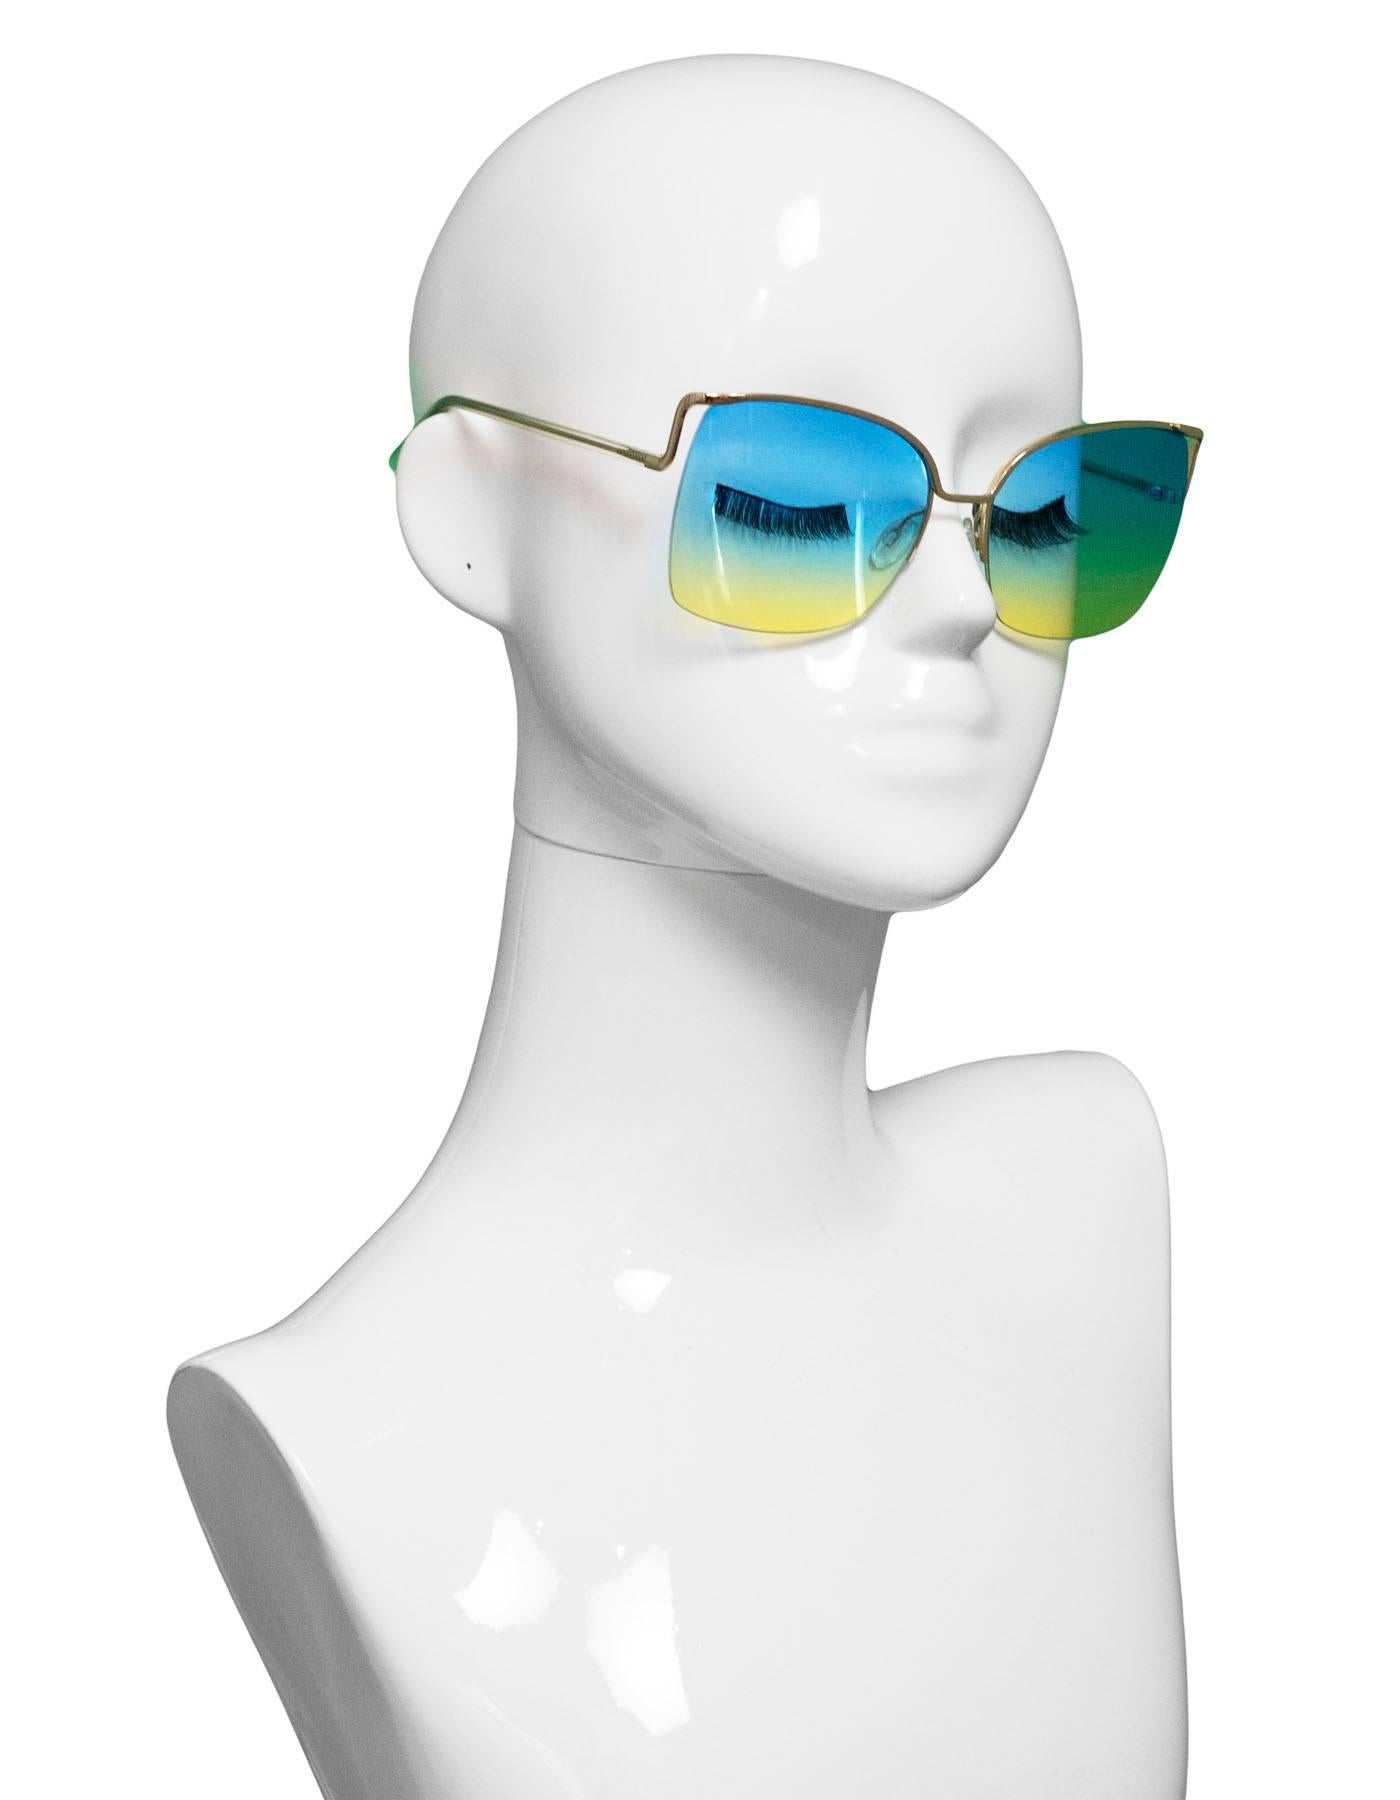 Barton Perreira Blue & Yellow Satdha Sunglasses
Feature's transparent beige acetate temples. These frames are styled with blue and yellow gradient lenses that offer 100% UVA and UVB protection.

Made In: Japan
Color: Blue, yellow,